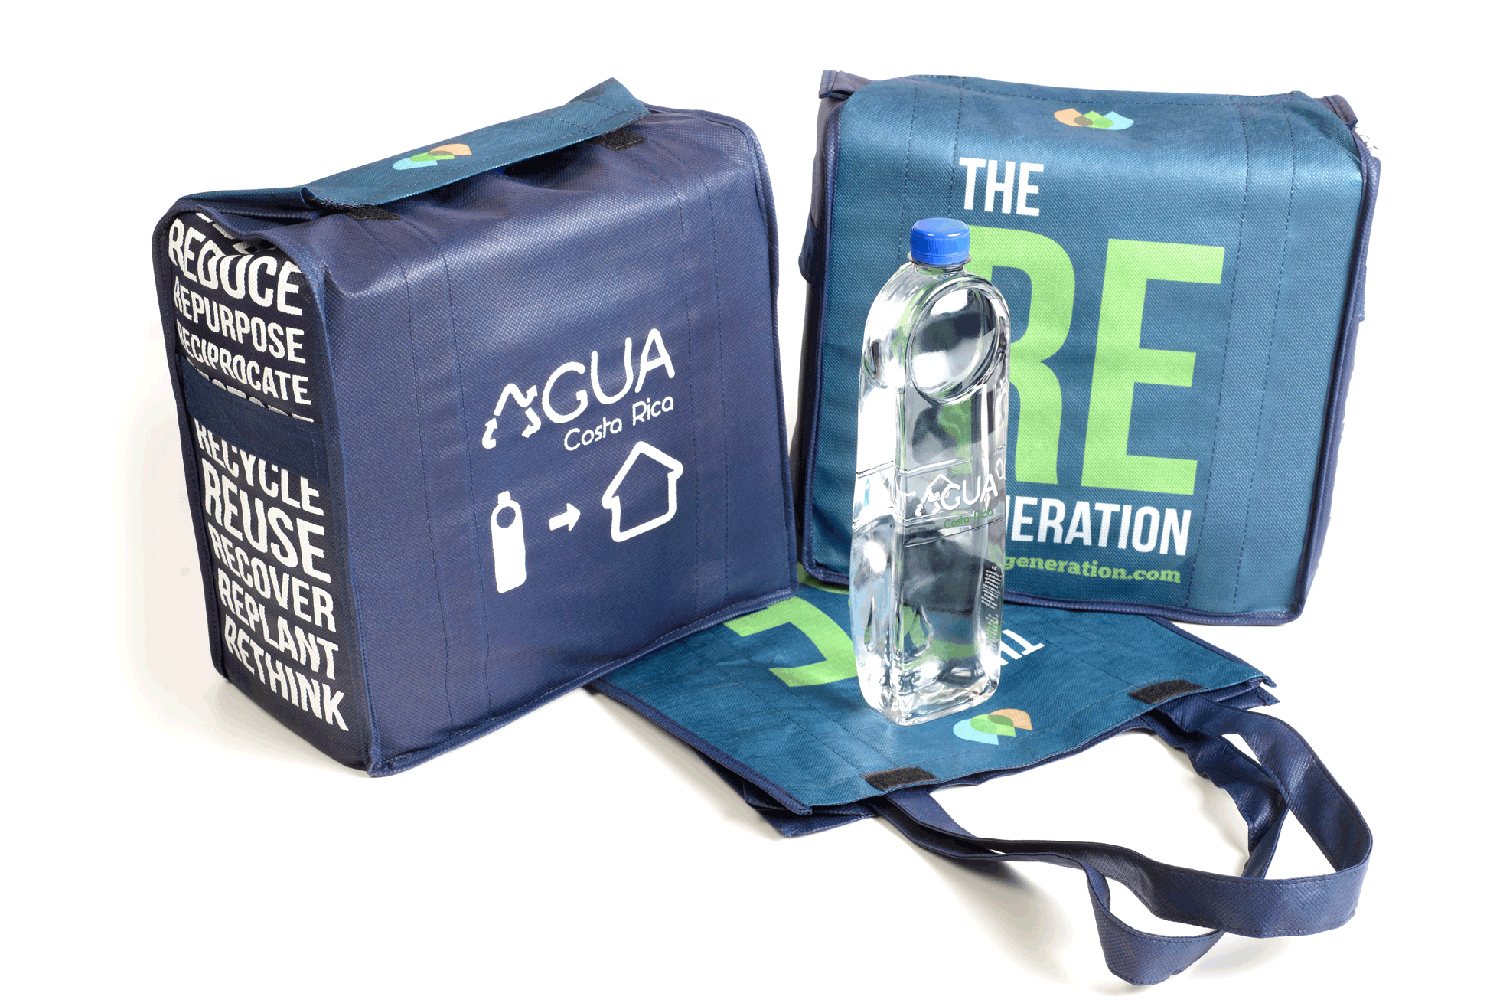 agua water bottles were designed to become roof tiles crdc costa rica bag